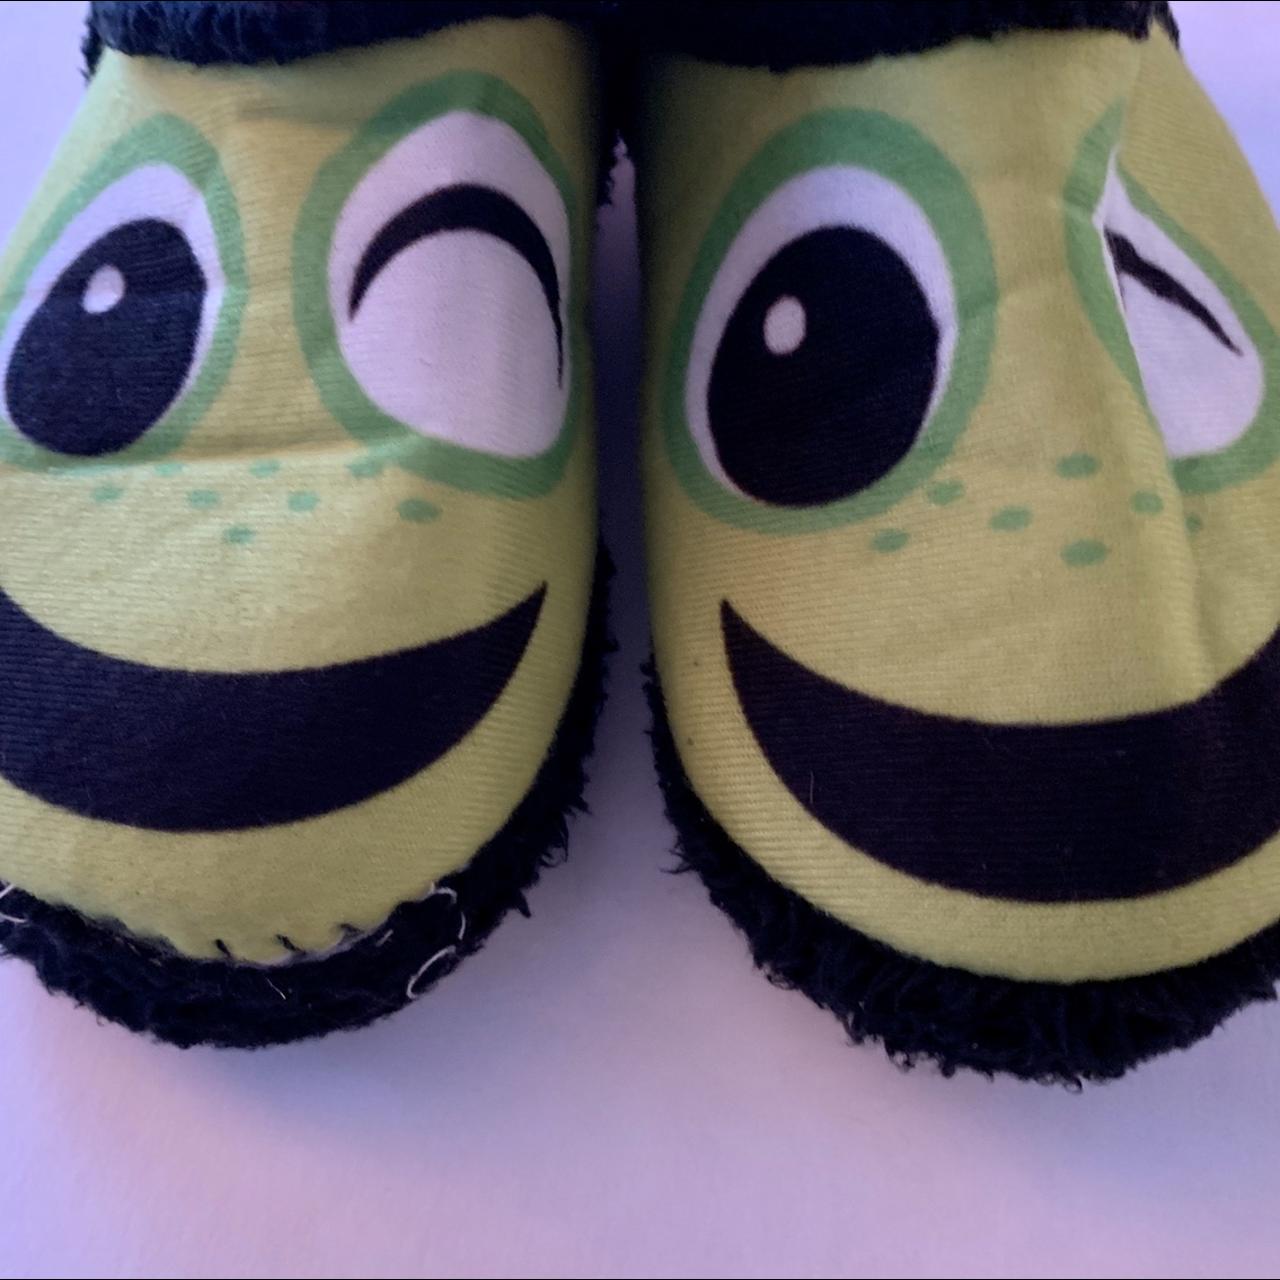 Product Image 4 - #Froggy #Slippers. Size #11/12. Very